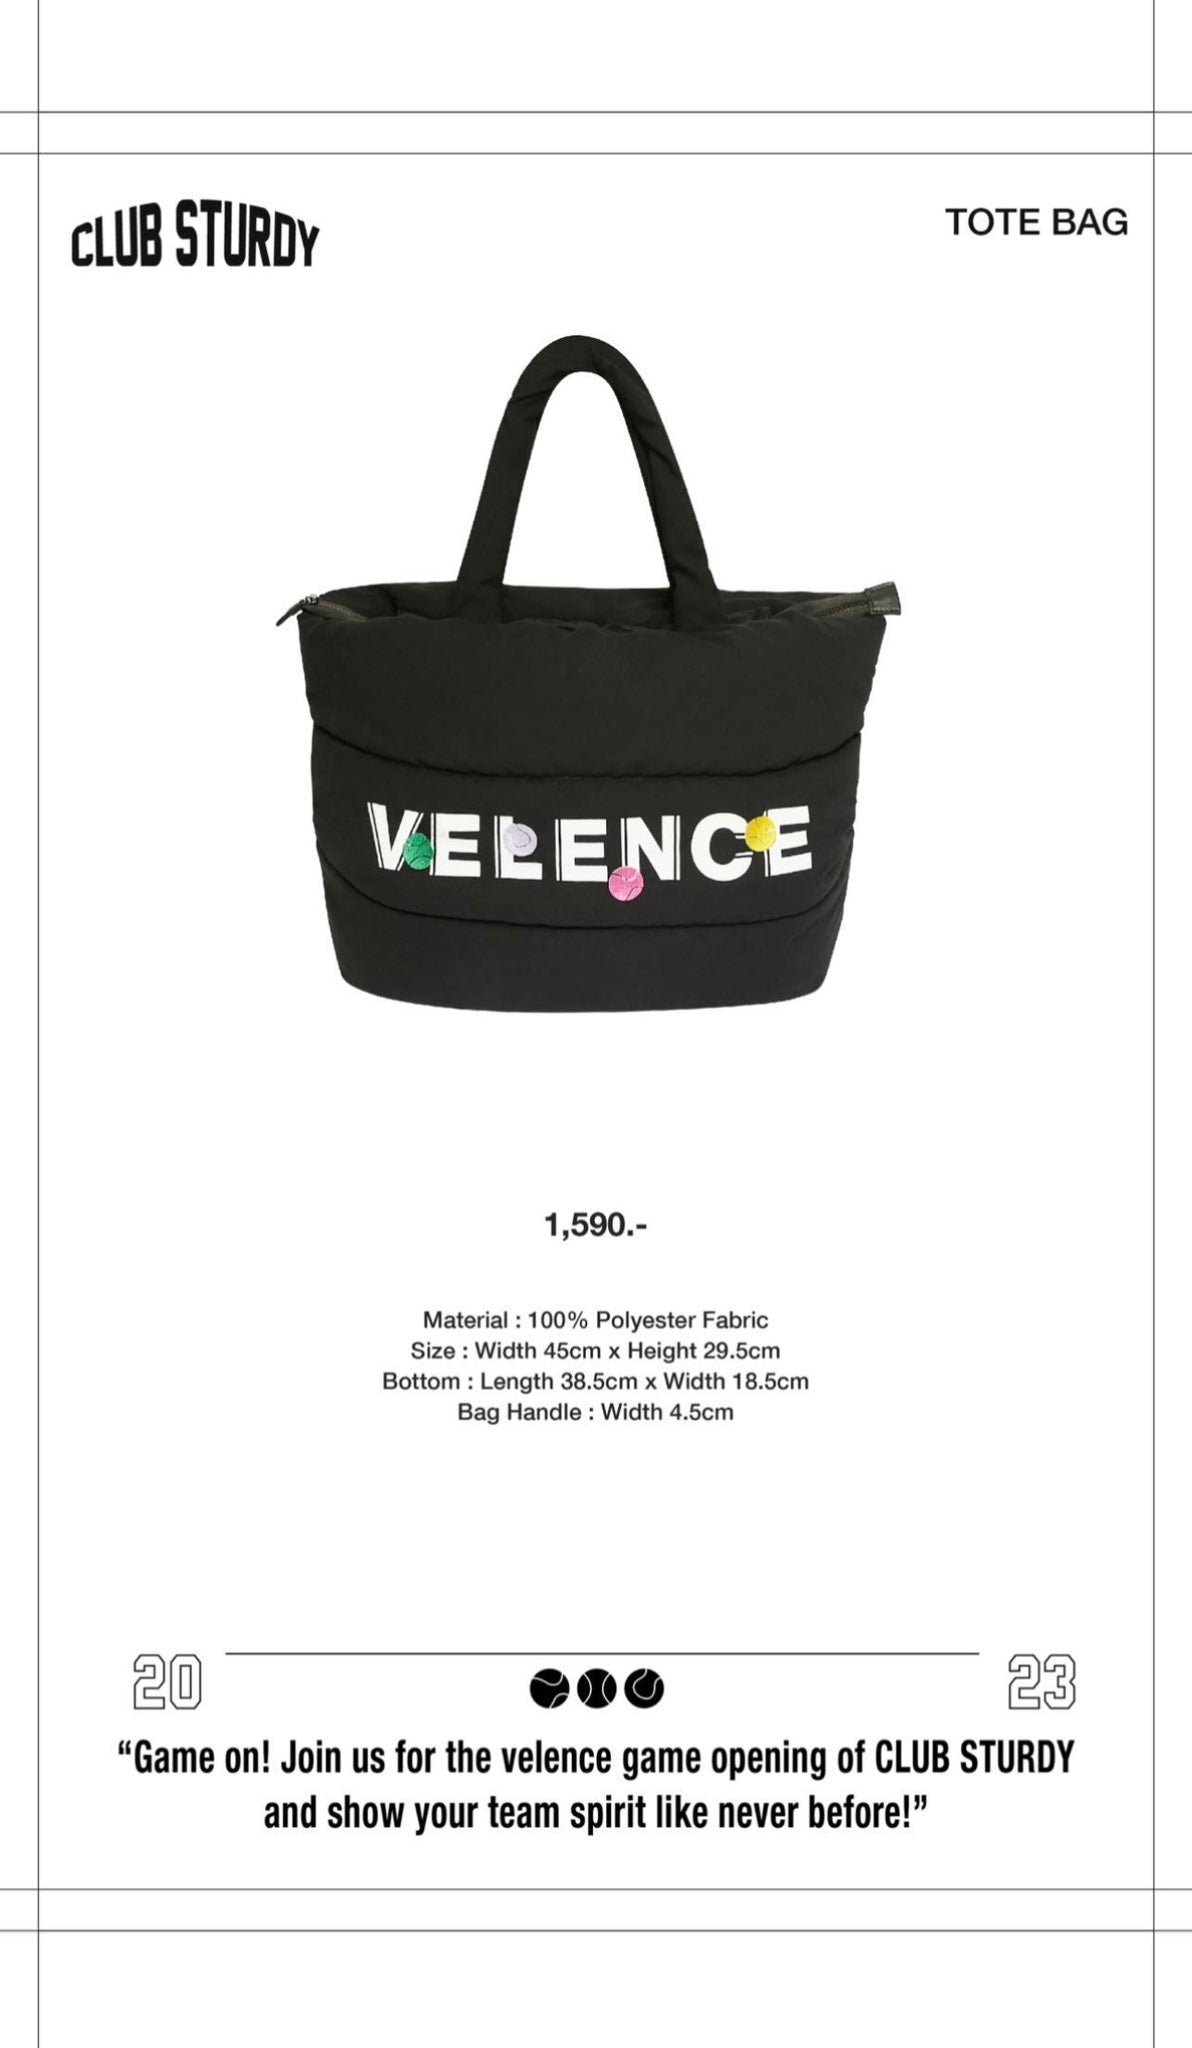 win velence , CLUB STURDY COLLECTION totebag トートバッグ （プレオーダー）